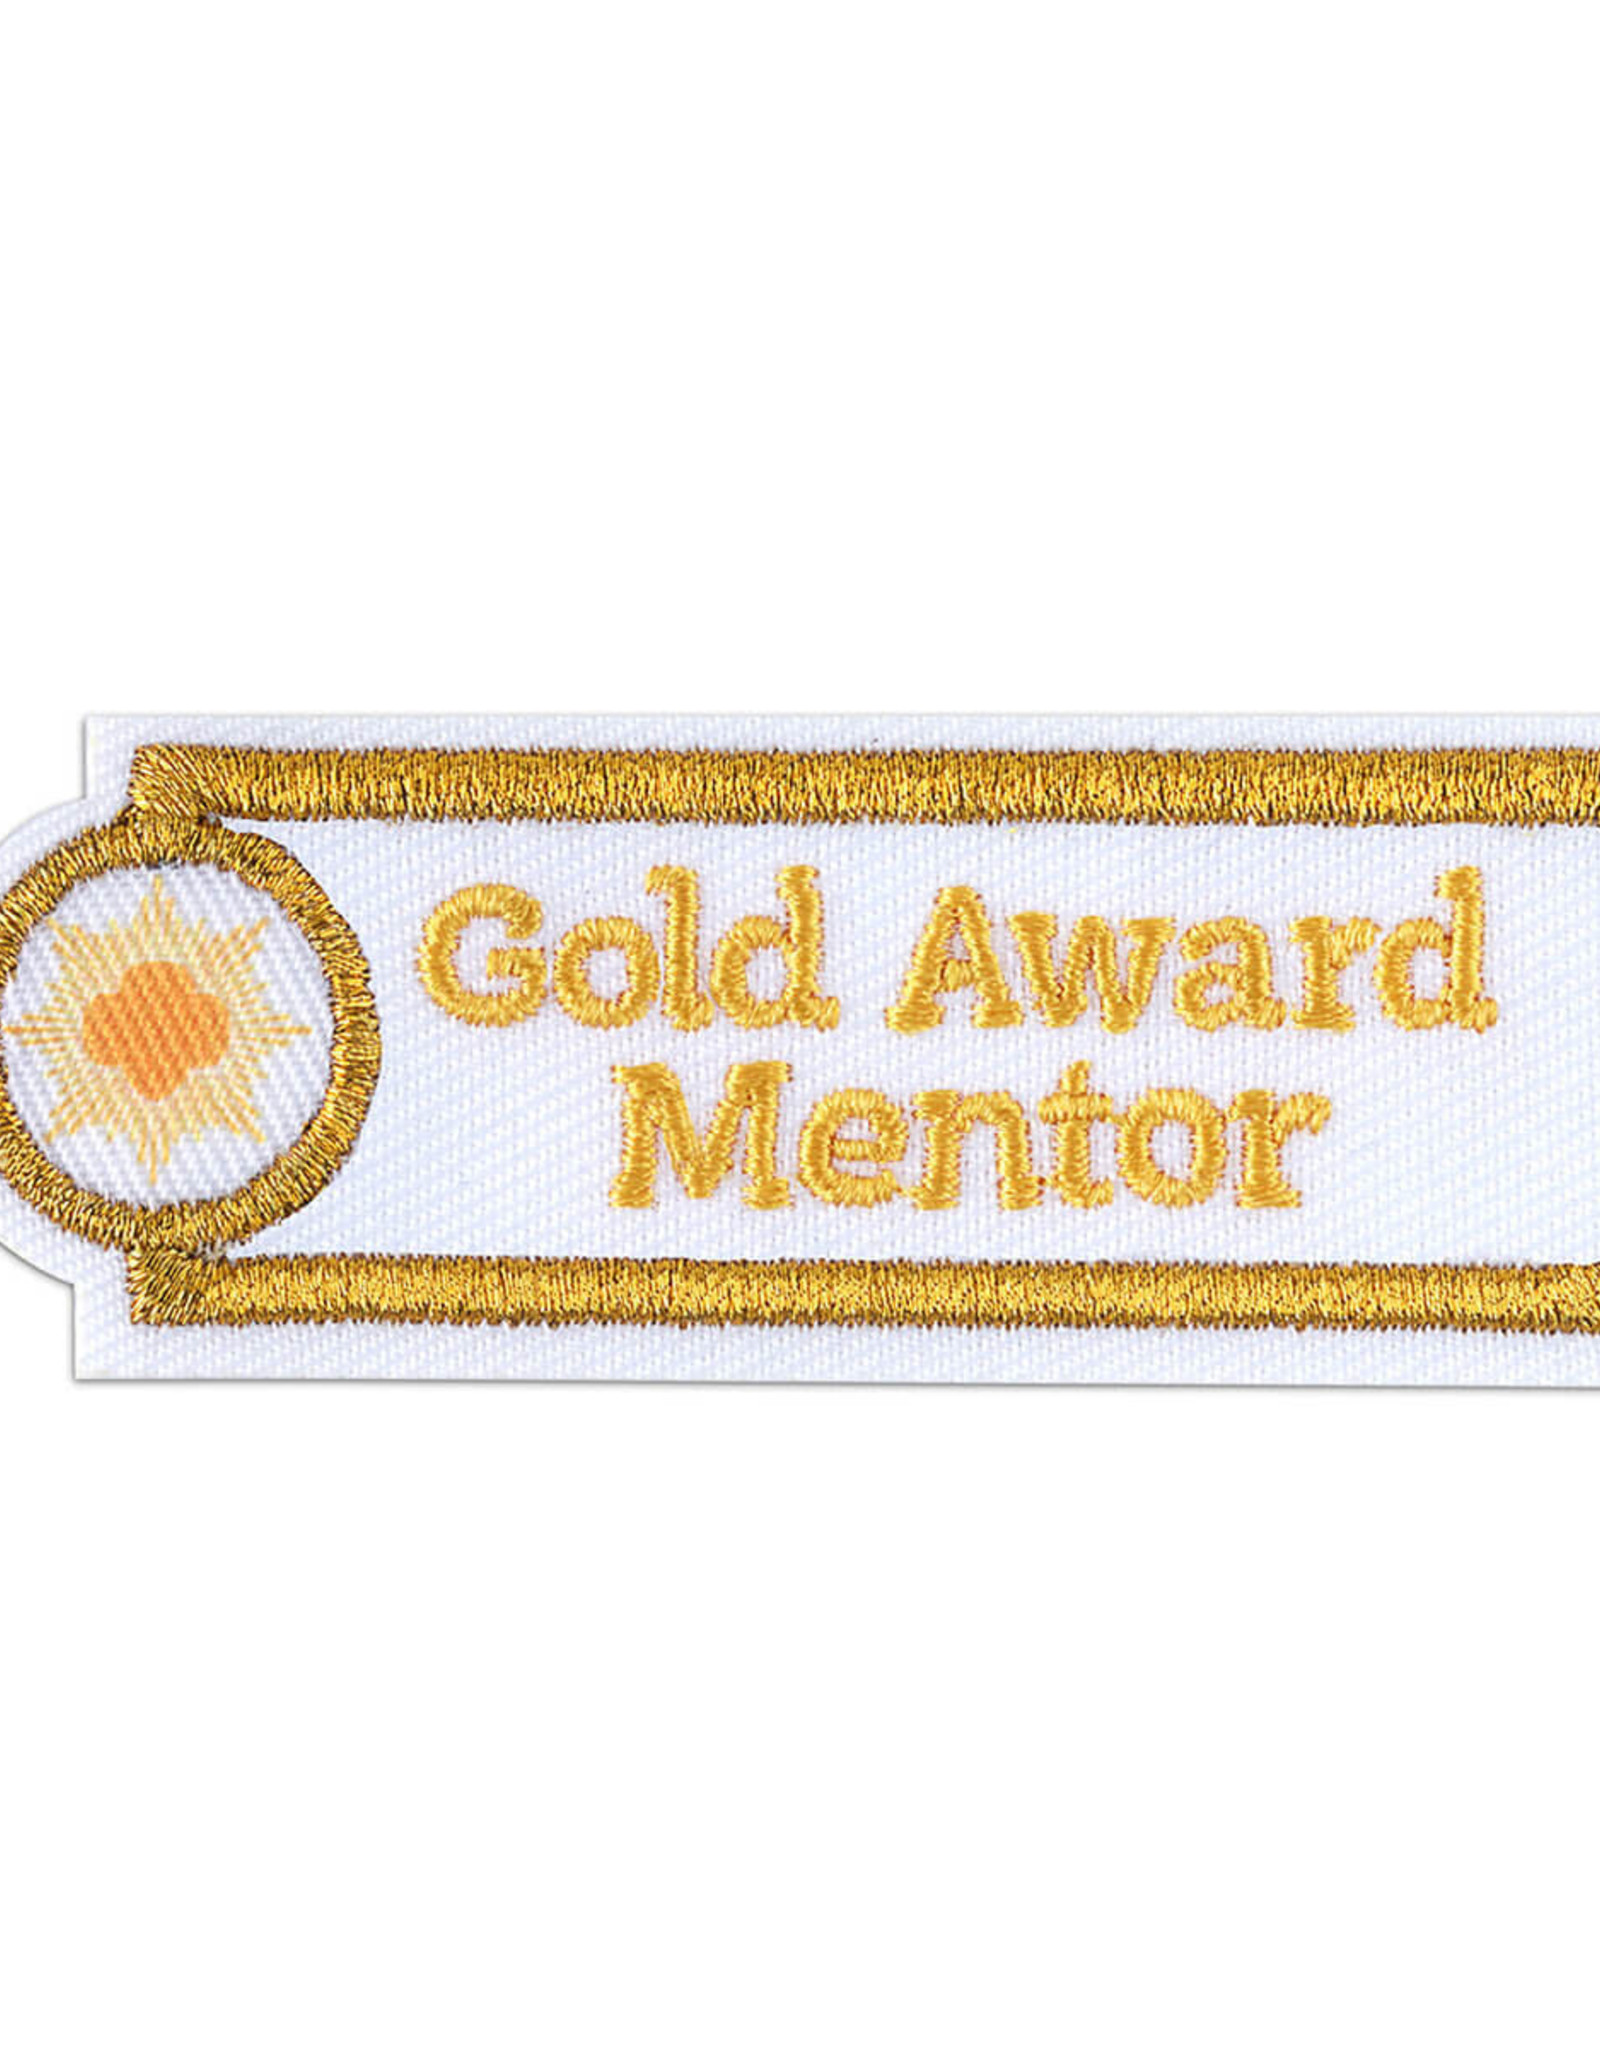 GIRL SCOUTS OF THE USA Gold Award Mentor Adult Achievement Patch